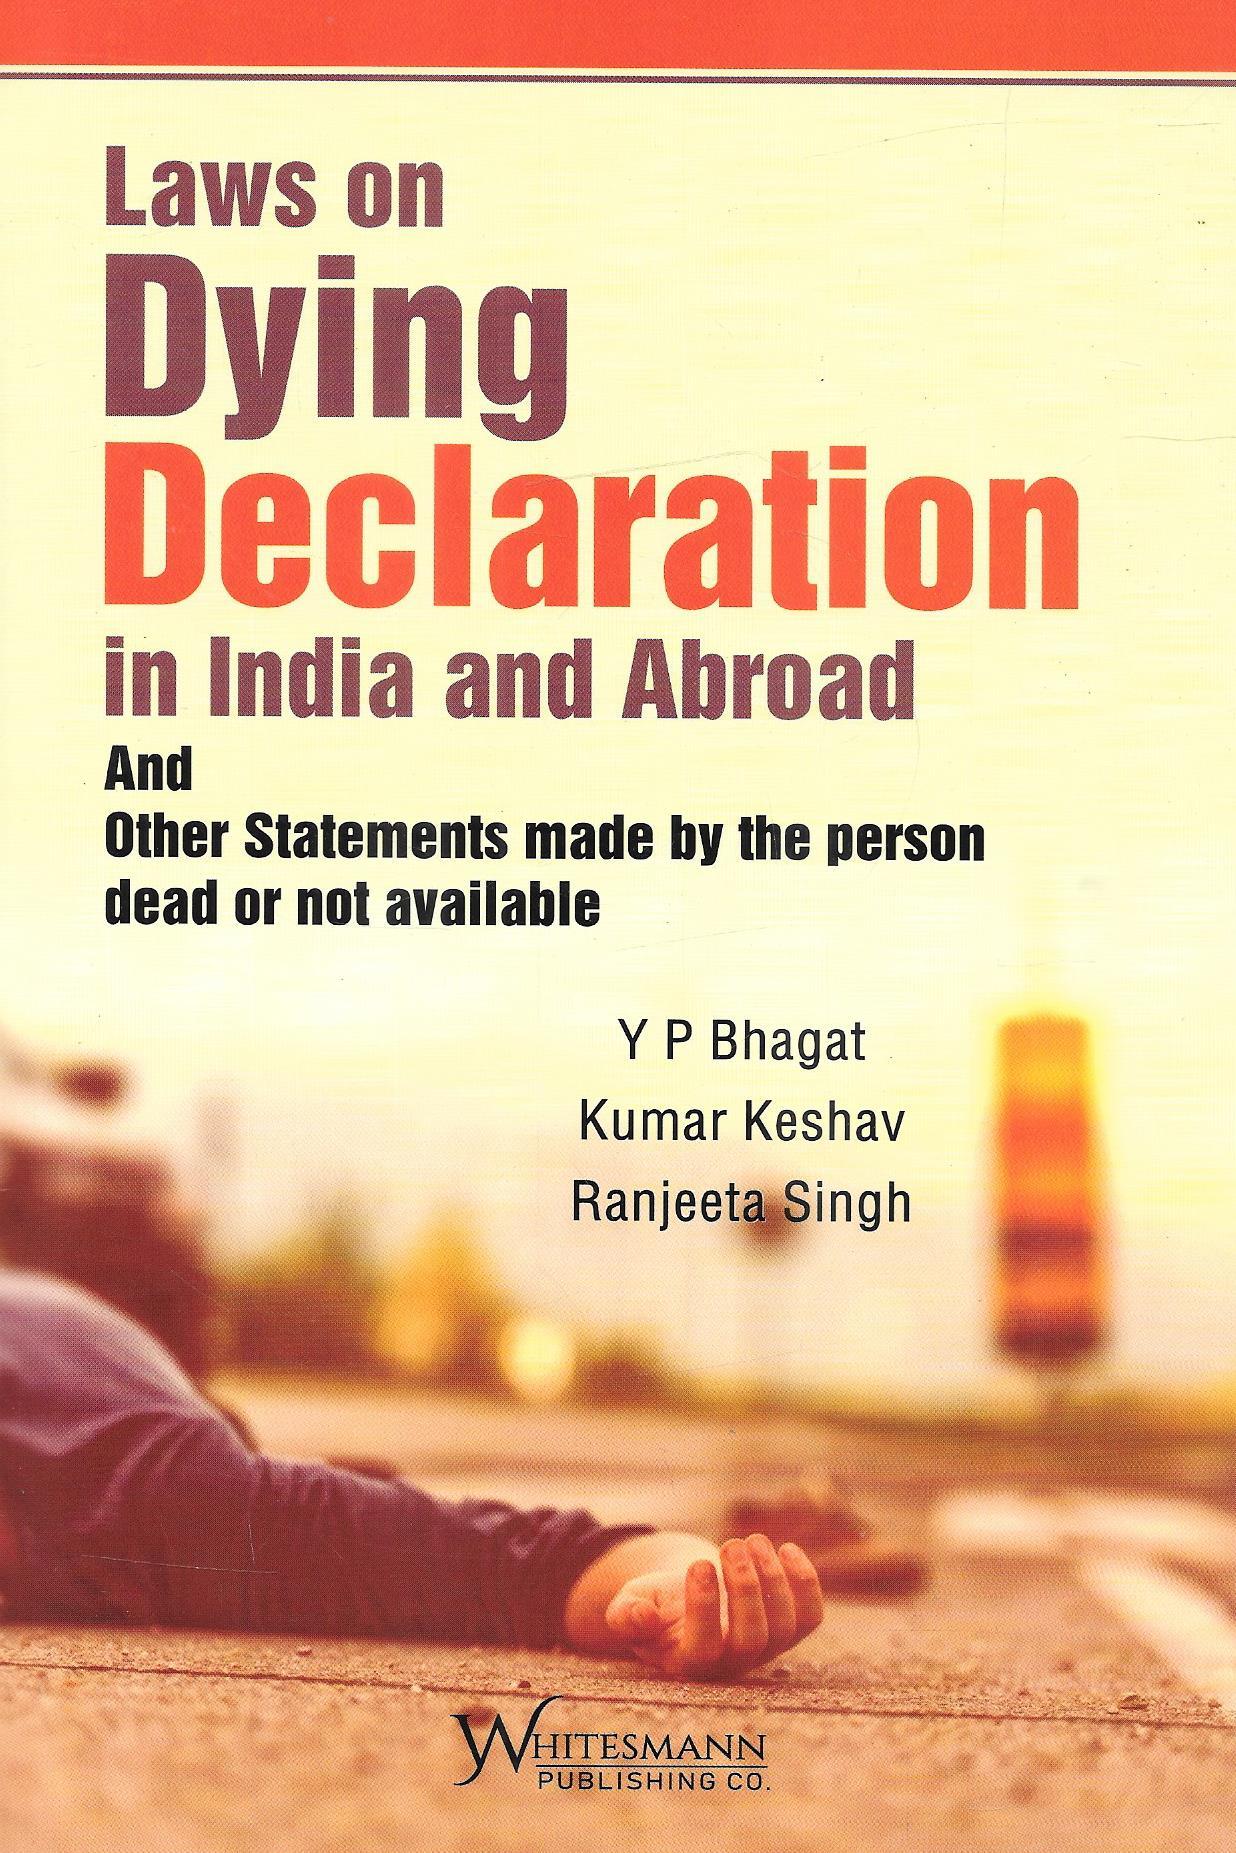 Laws on Dying Declaration in India and Abroad and Other Statements made by the person dead or not available